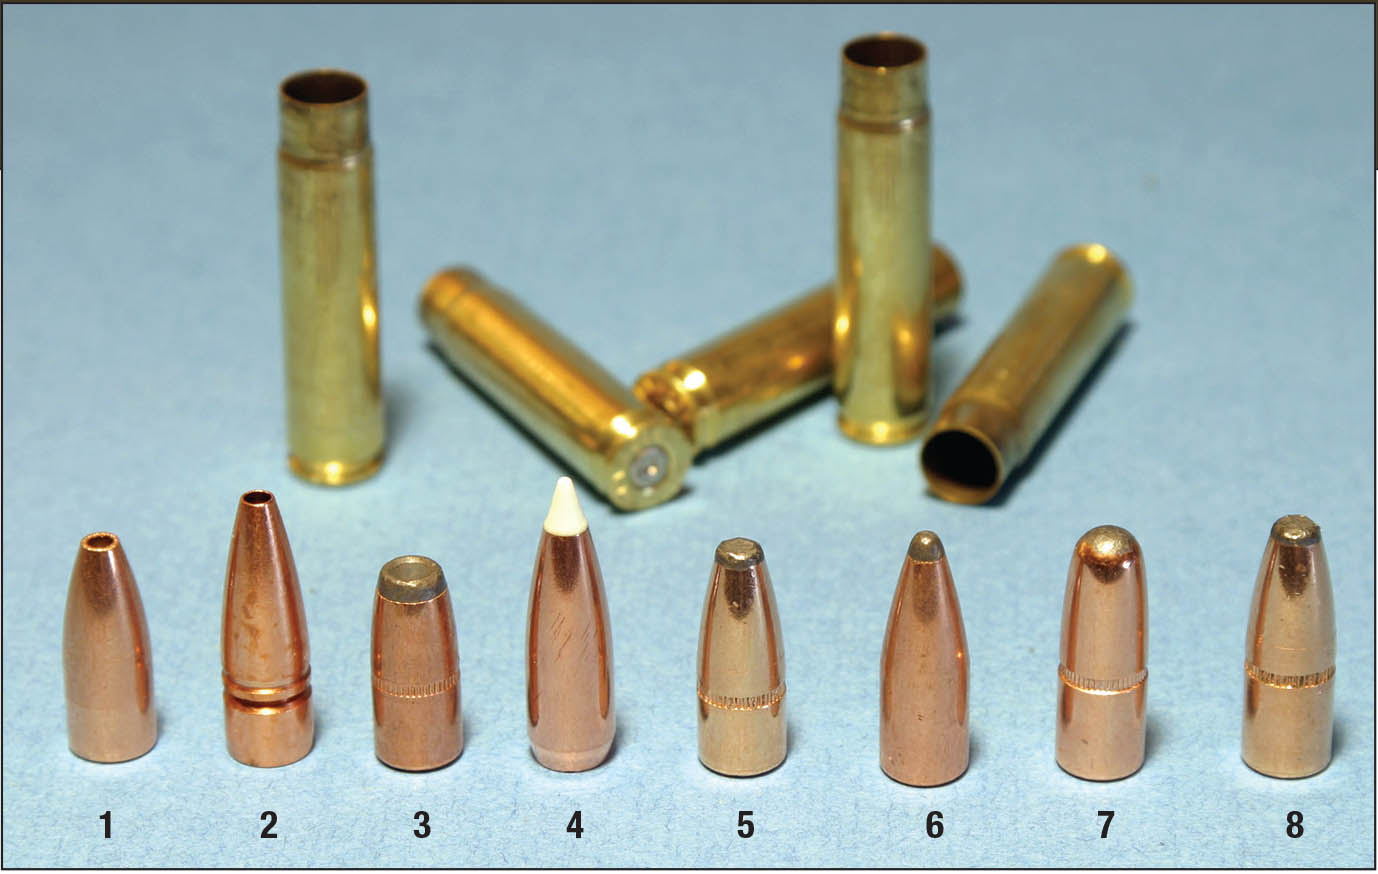 The 1:15 rifling twist of the barrel easily handled a variety of bullets from 110 to 150 grains, including the (1) Sierra 110-grain HP, (2) Lehigh Defense 110 Controlled Chaos, (3) Sierra 125 ProHunter HP, (4) Nosler 125 AccuBond, (5) Speer 130 Hot-Cor FN, (6) Hornady 130 Spire Point, (7) Hornady 150 InterLock RN and the (8) Speer 150-grain Hot-Cor FN.